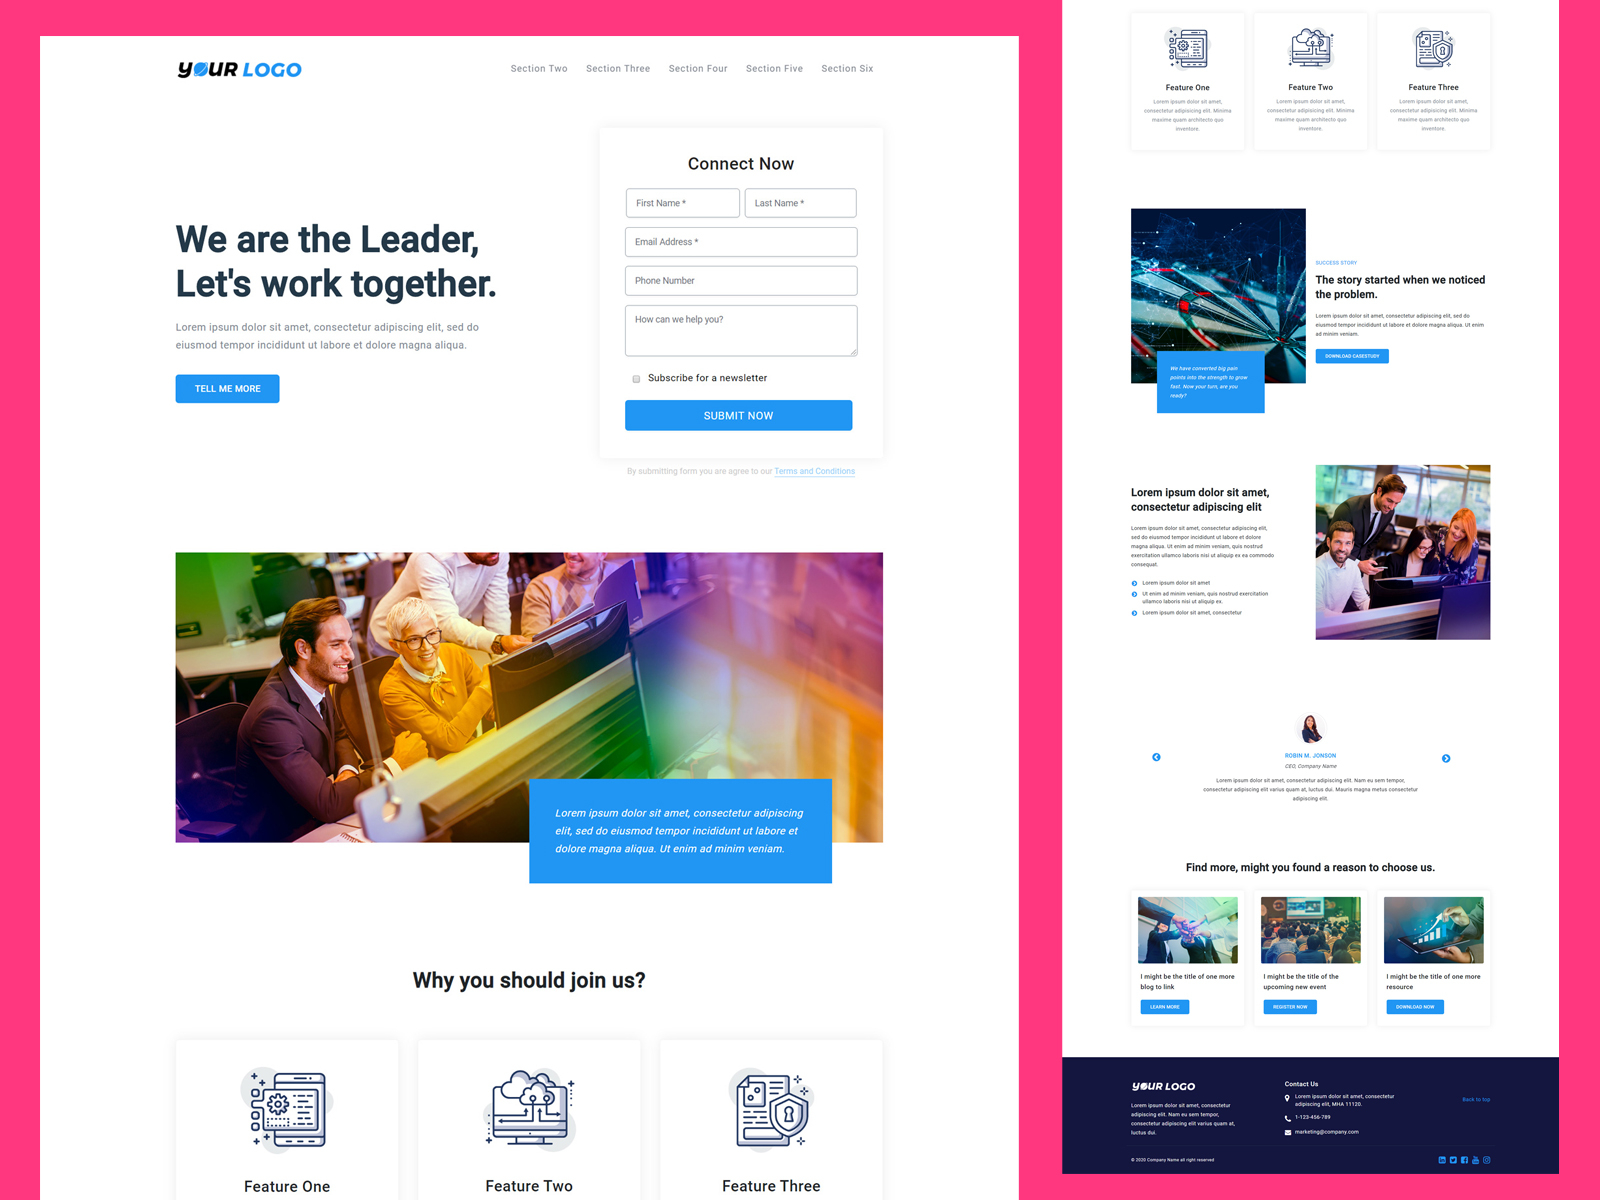 pardot-landing-page-layout-template-by-haridas-patil-on-dribbble